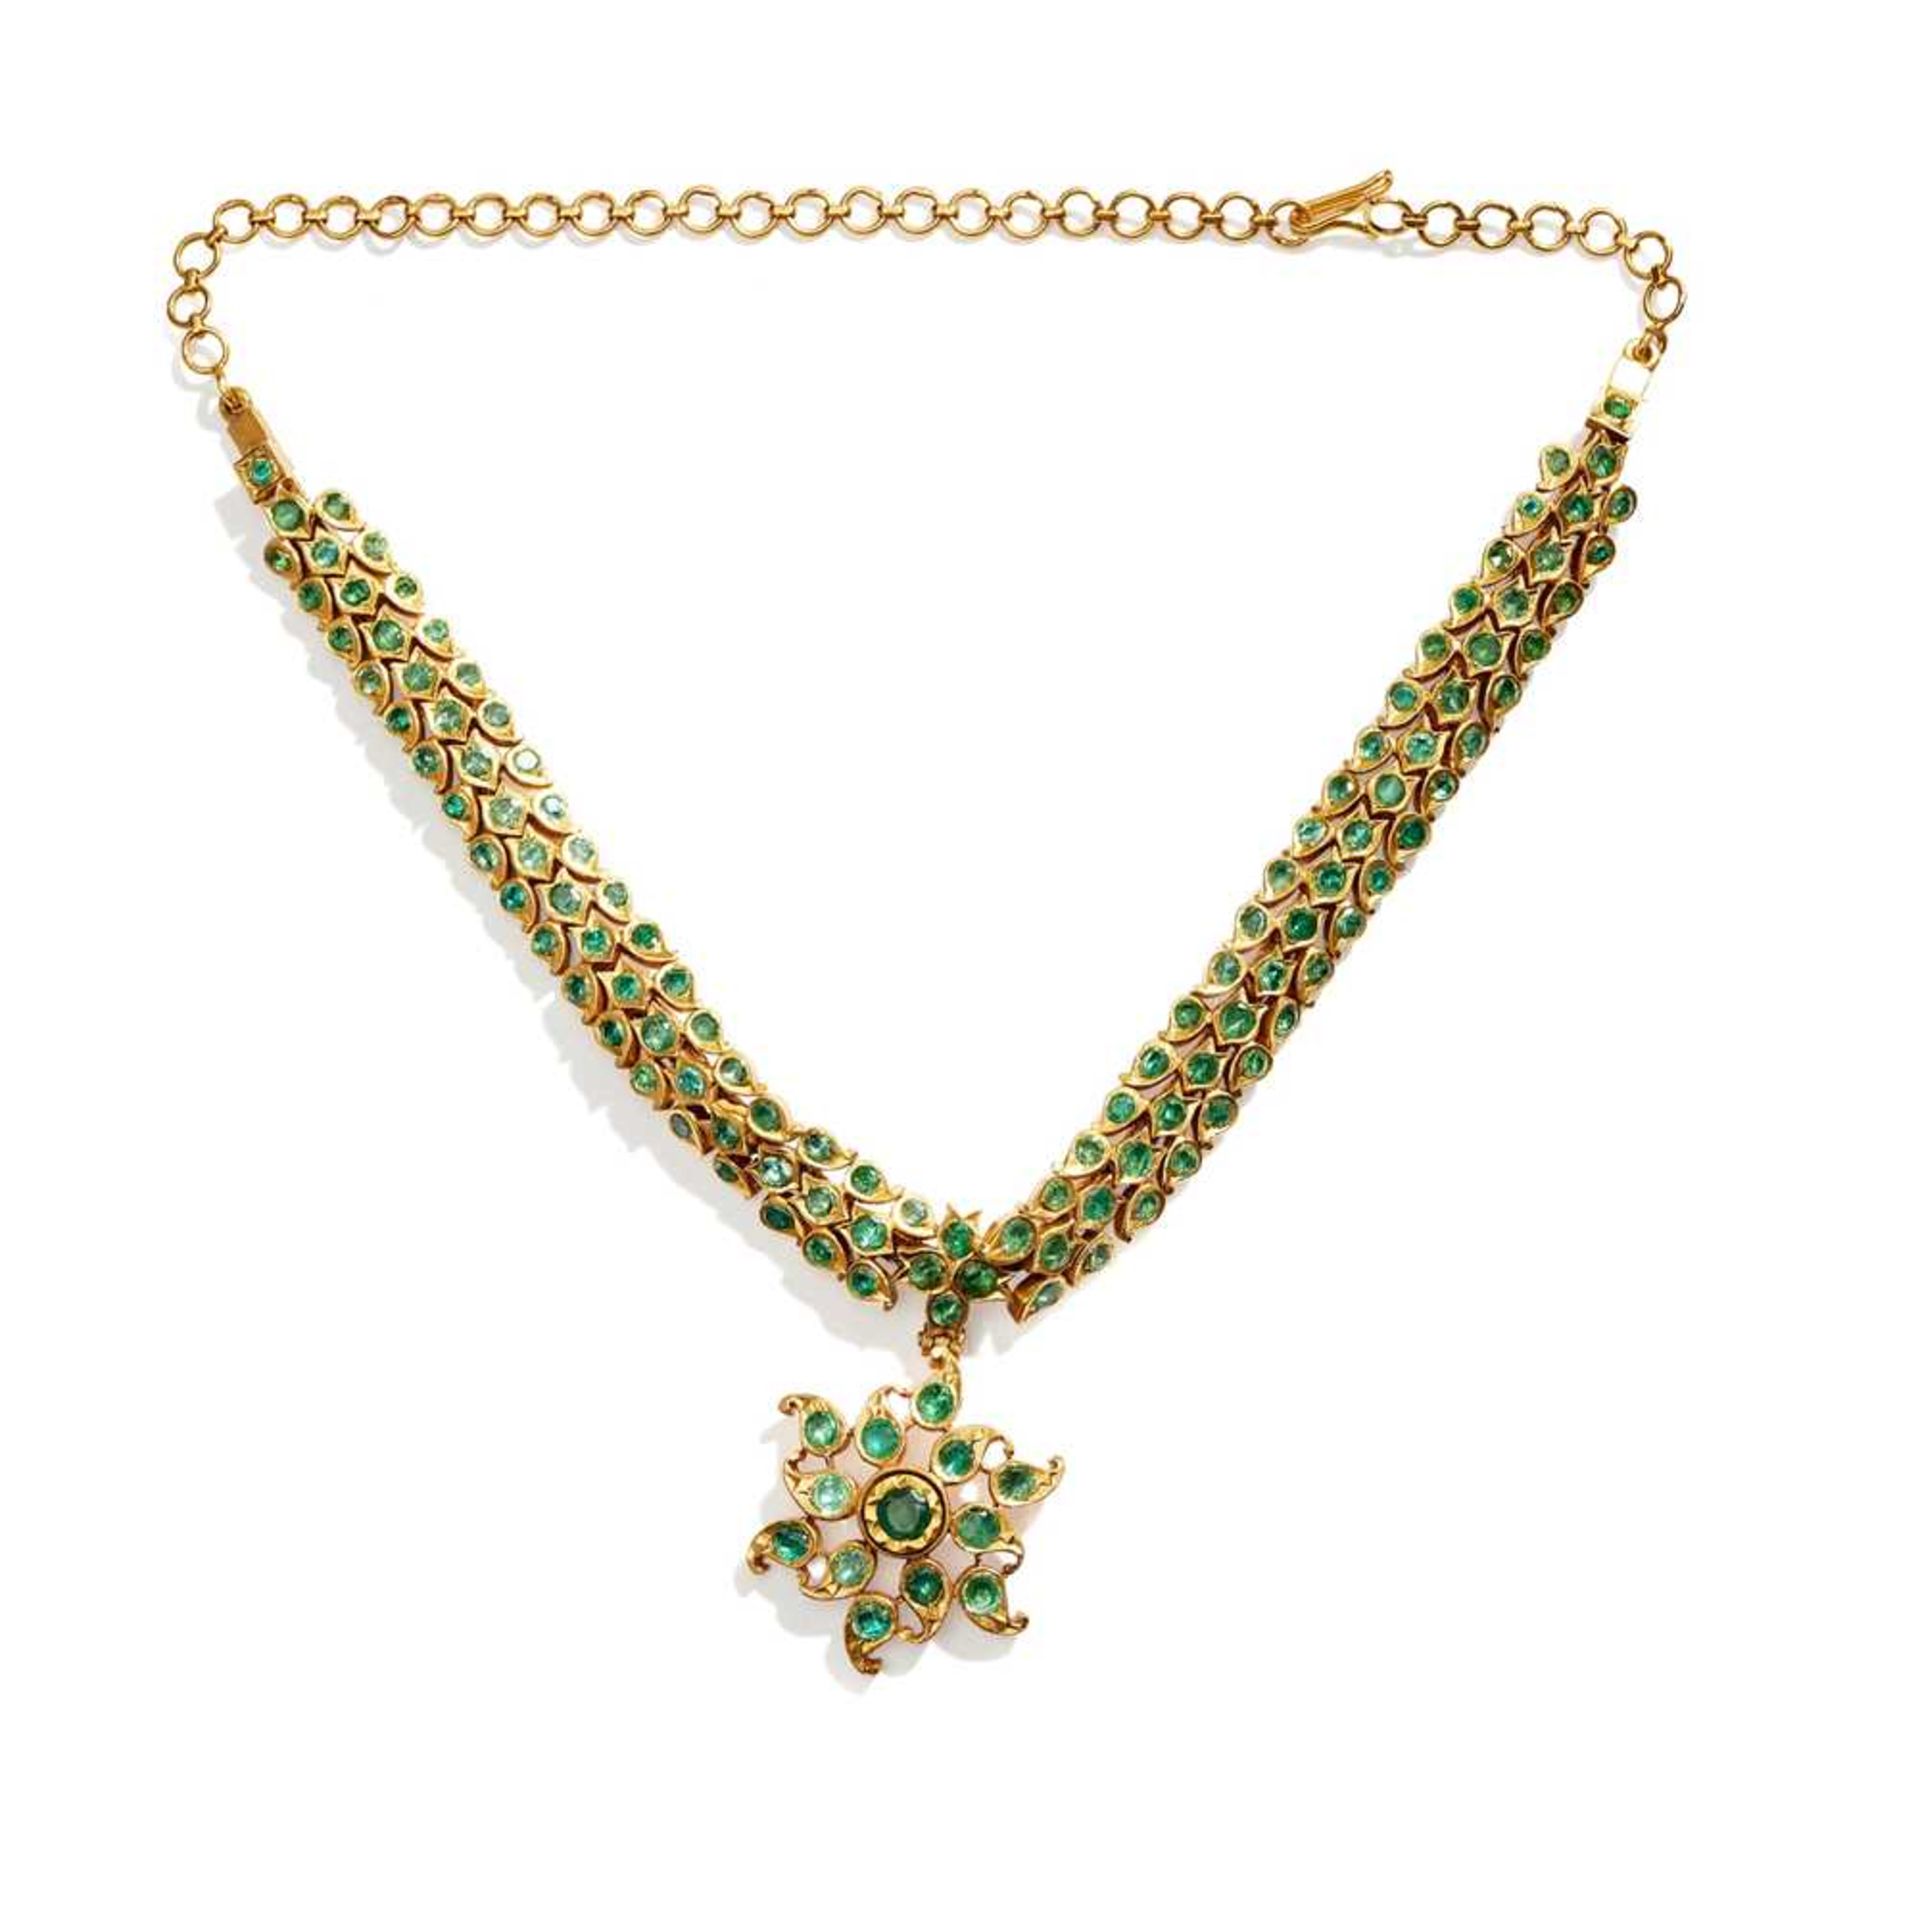 An antique Indian beryl necklace - Image 2 of 4